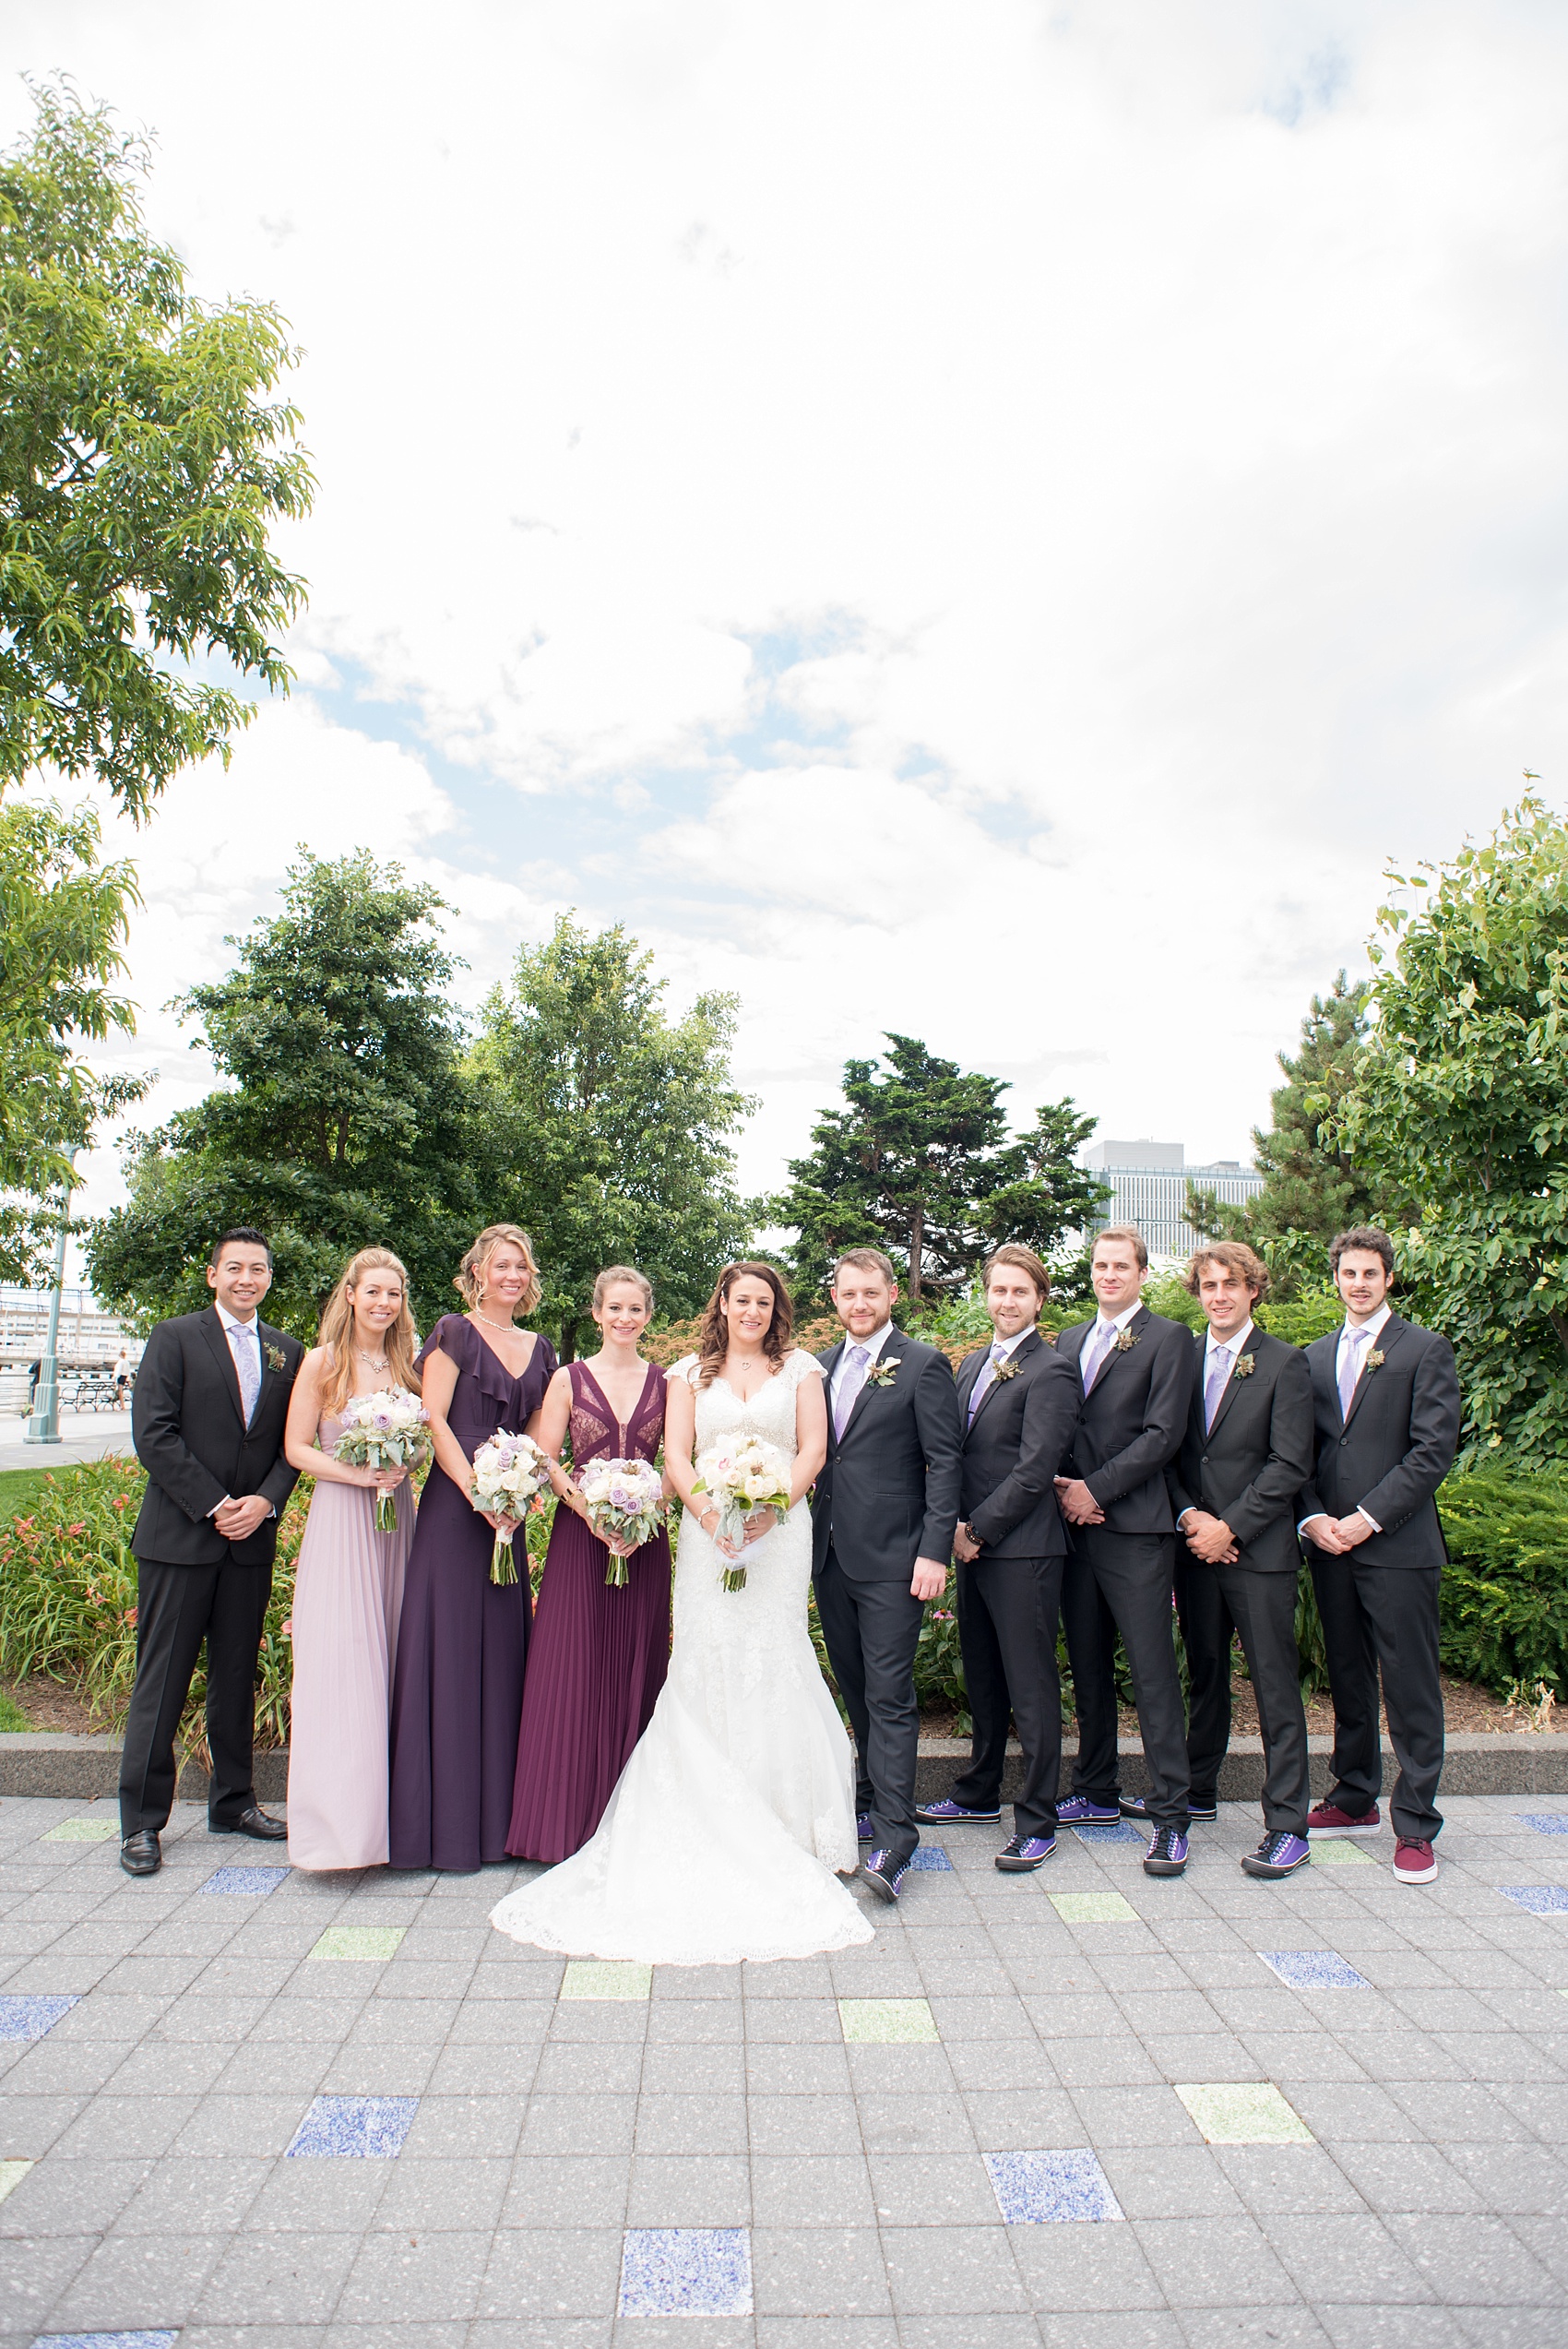 Mikkel Paige Photography photos of a NYC wedding at Tribeca Rooftop. An urban image of the wedding party in shades of mismatched purple dresses with rose and succulent bouquets and groomsmen in paisley purple ties and custom Converse sneakers.